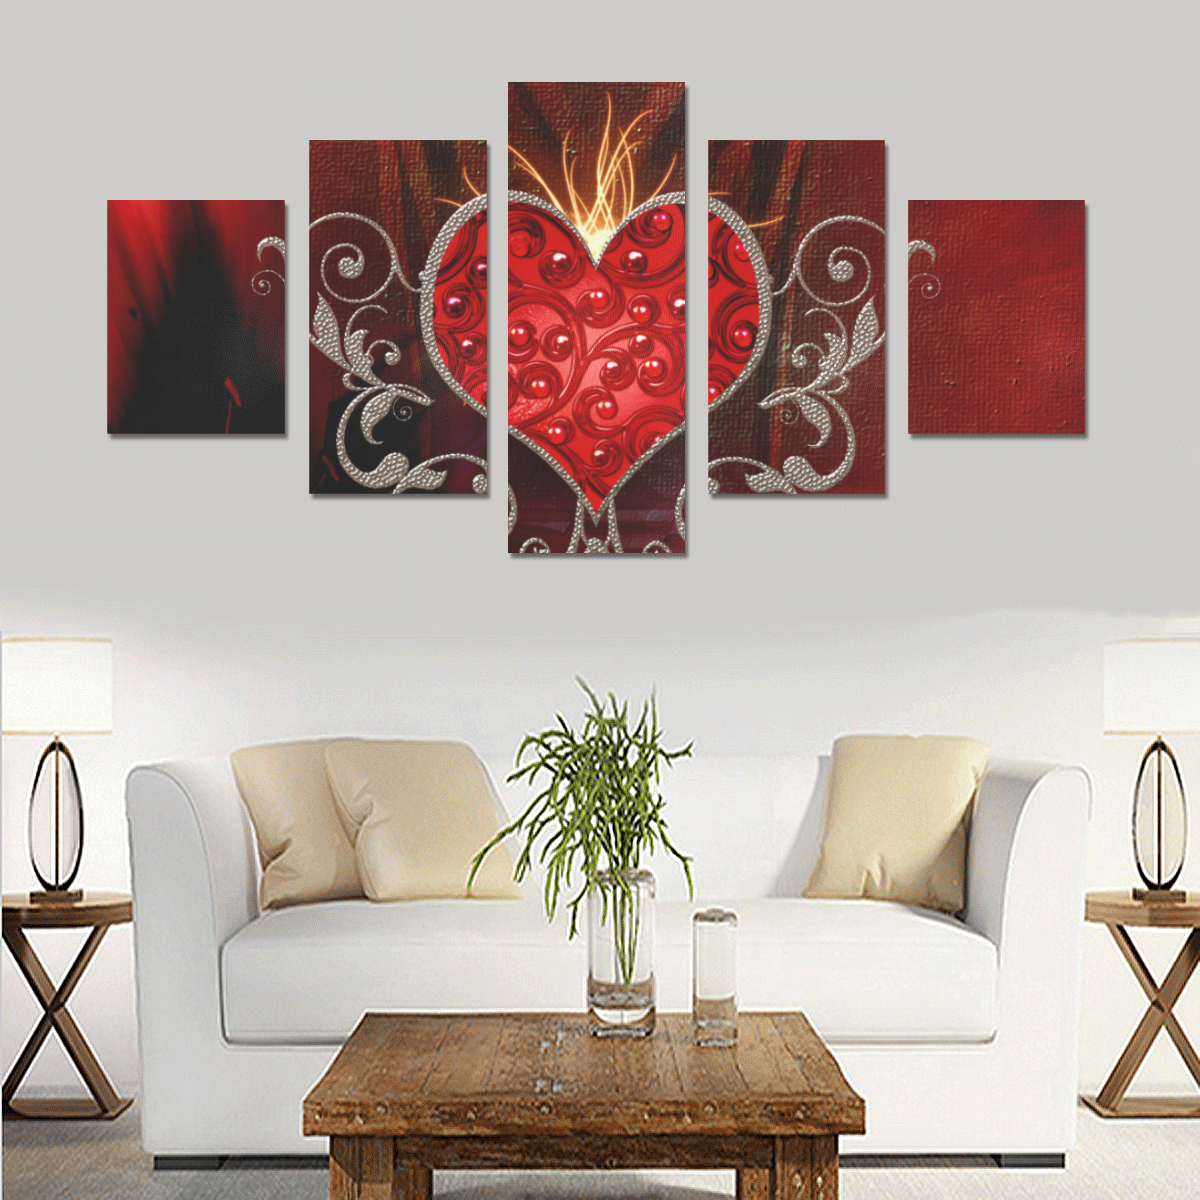 Wonderful heart with wings Canvas Print Sets B (No Frame)